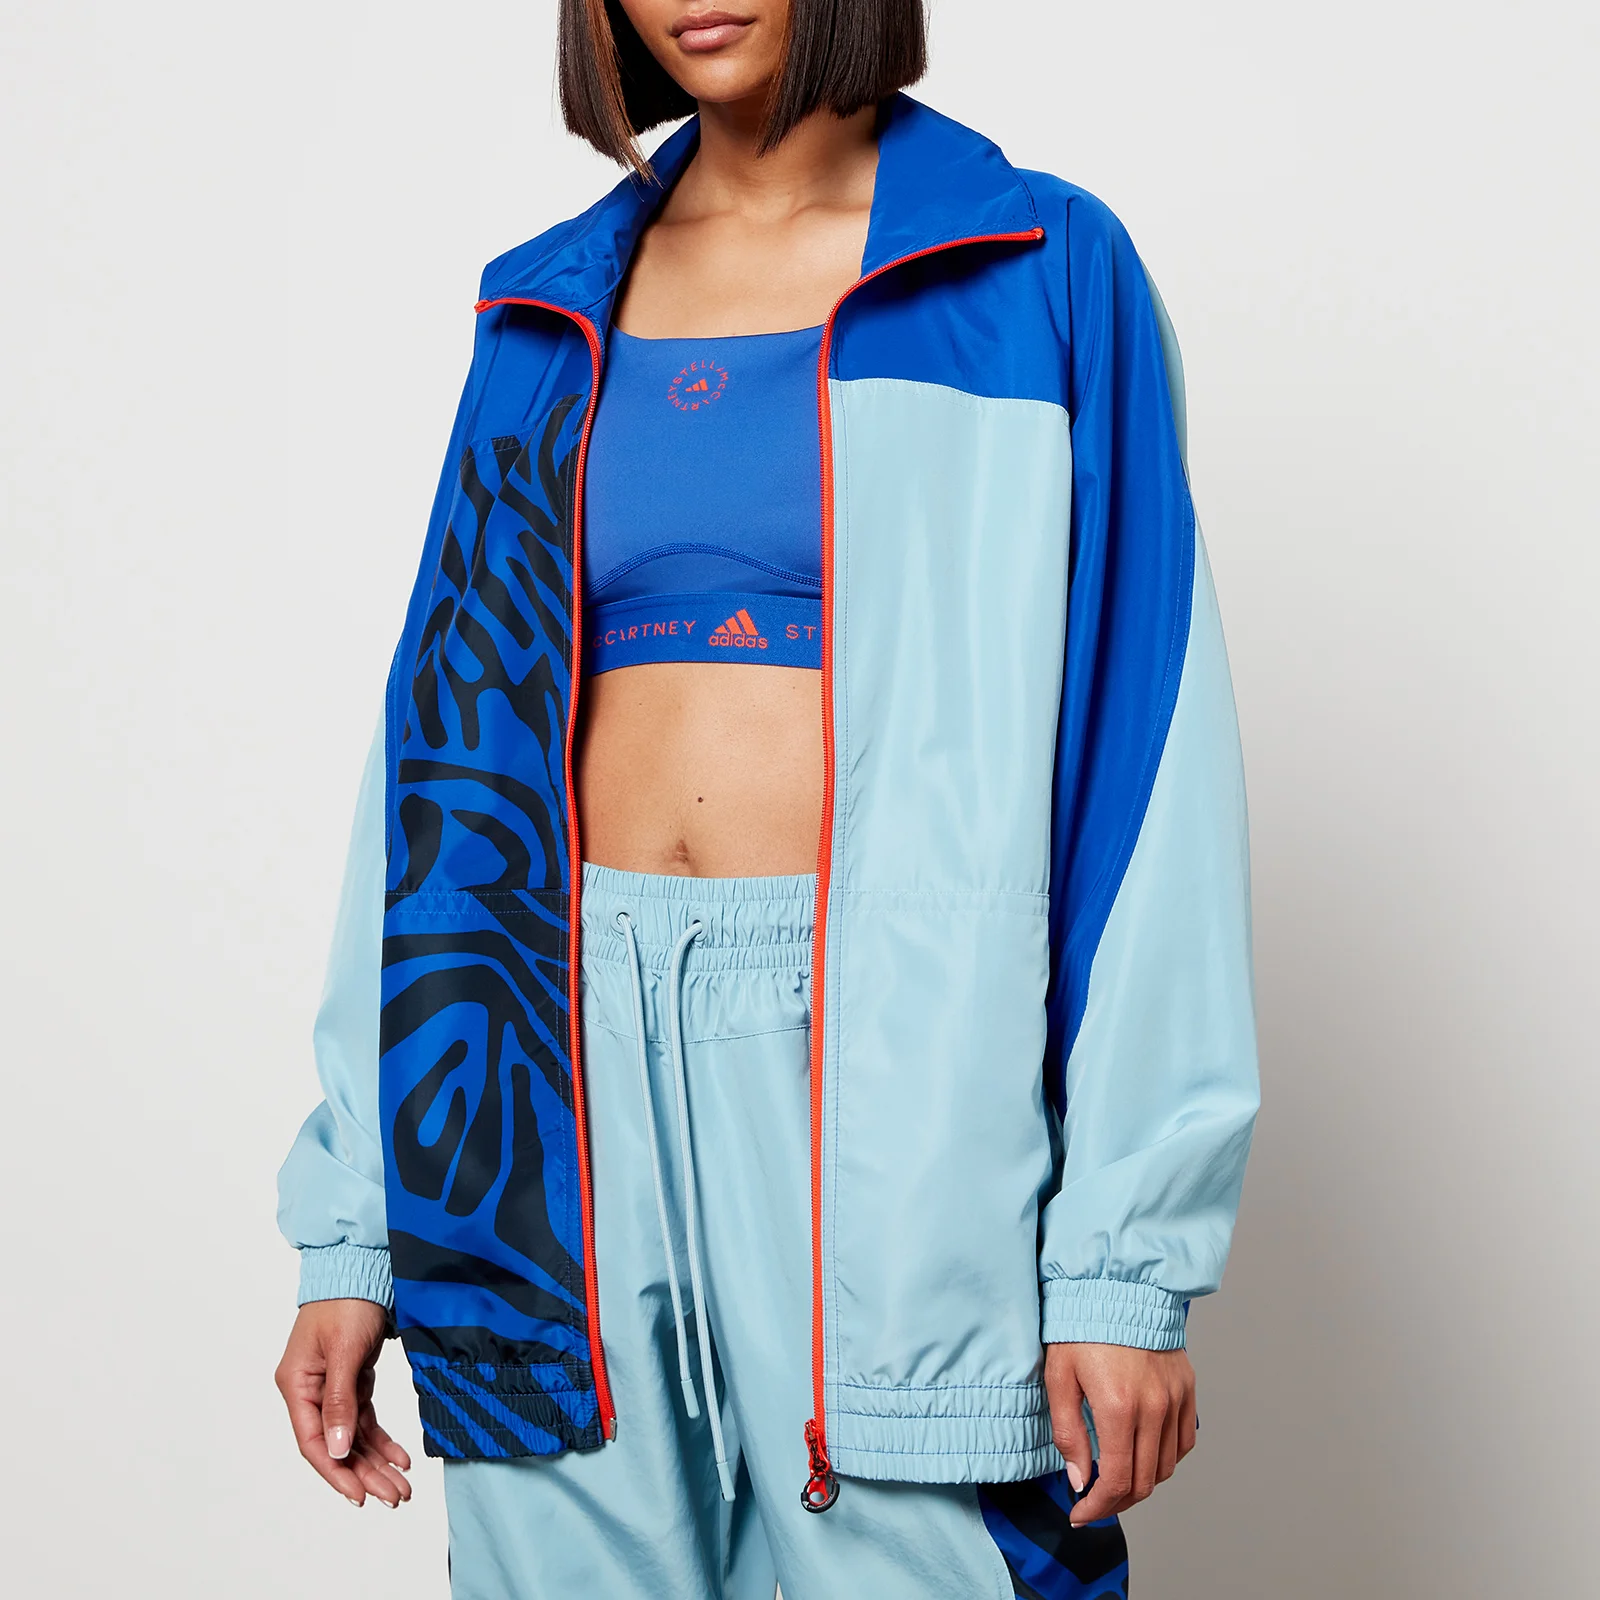 adidas by Stella McCartney Women's Hooded Track Top - Blue Image 1